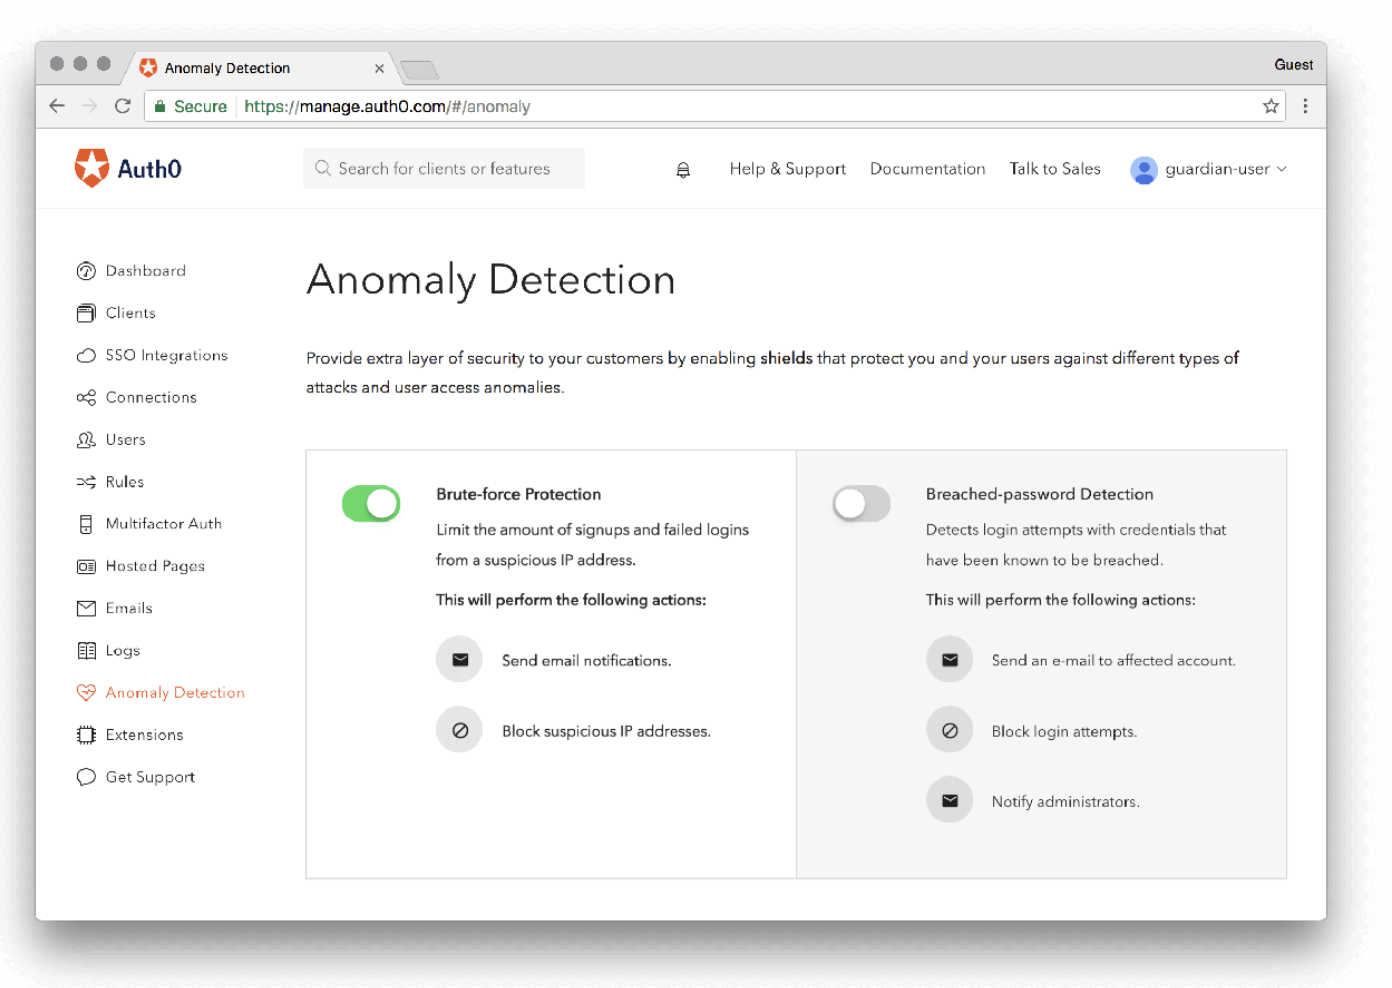 Anomaly Detection view on Auth0